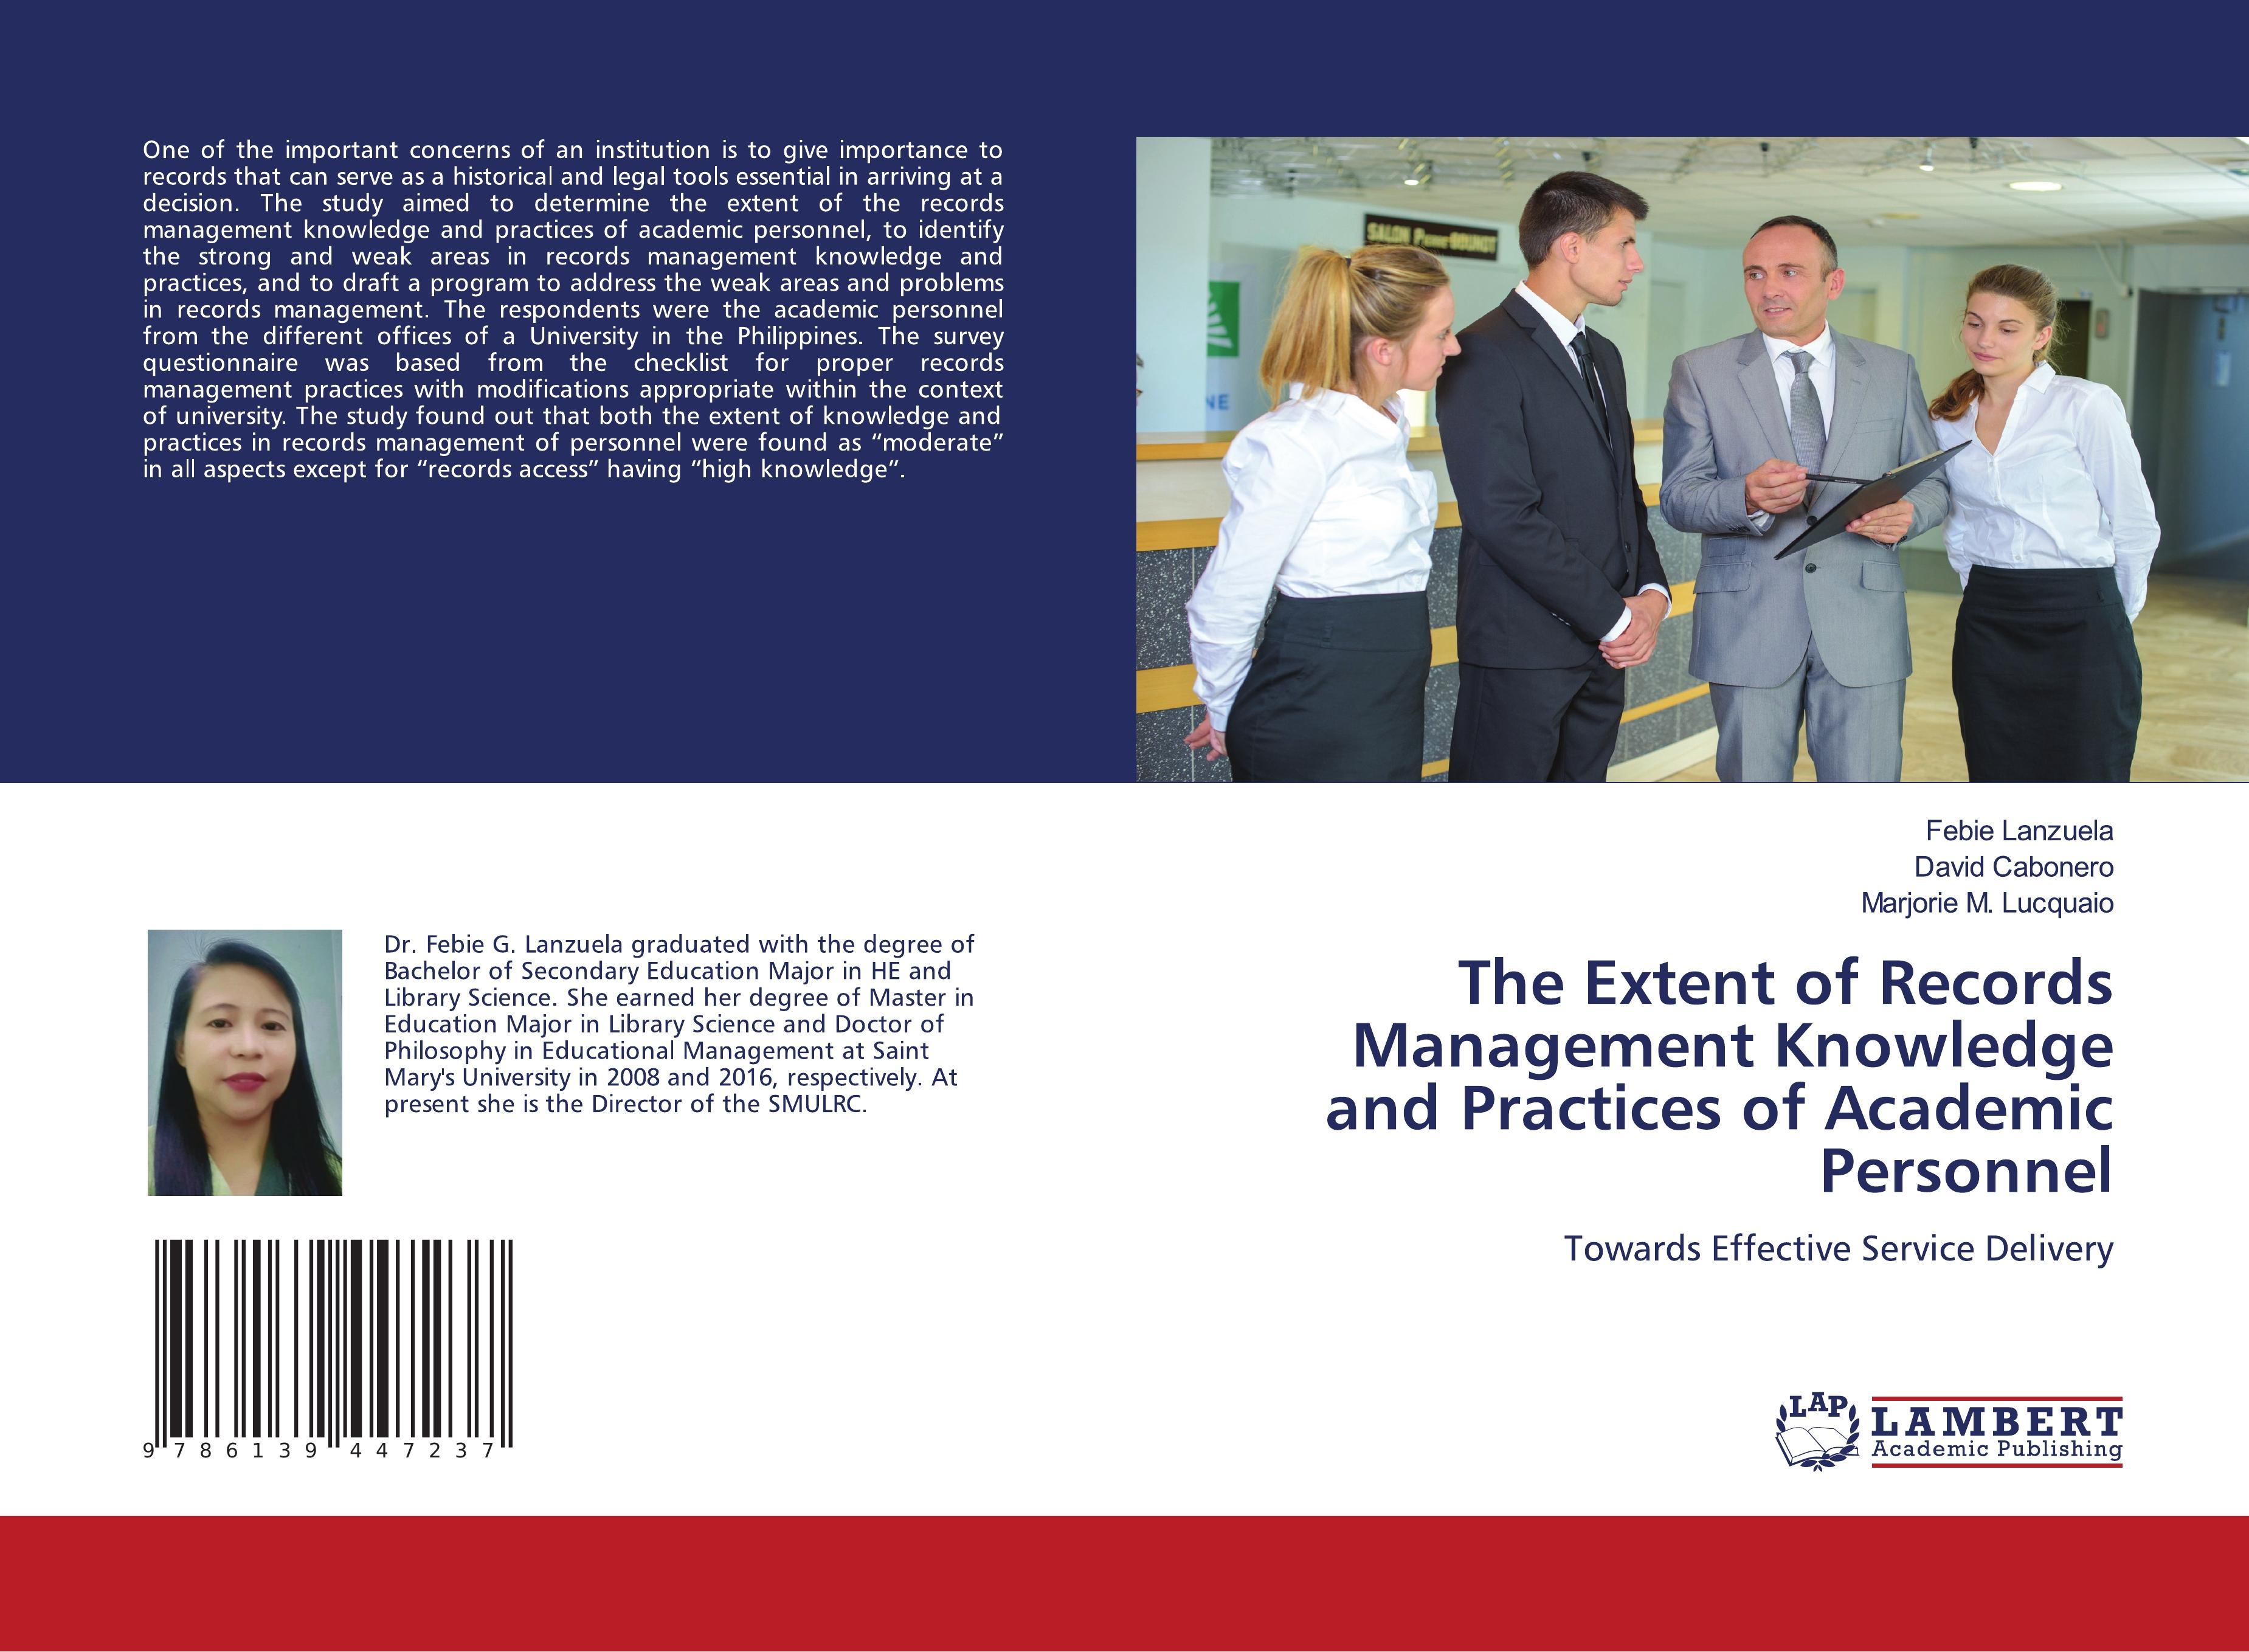 The Extent of Records Management Knowledge and Practices of Academic Personnel